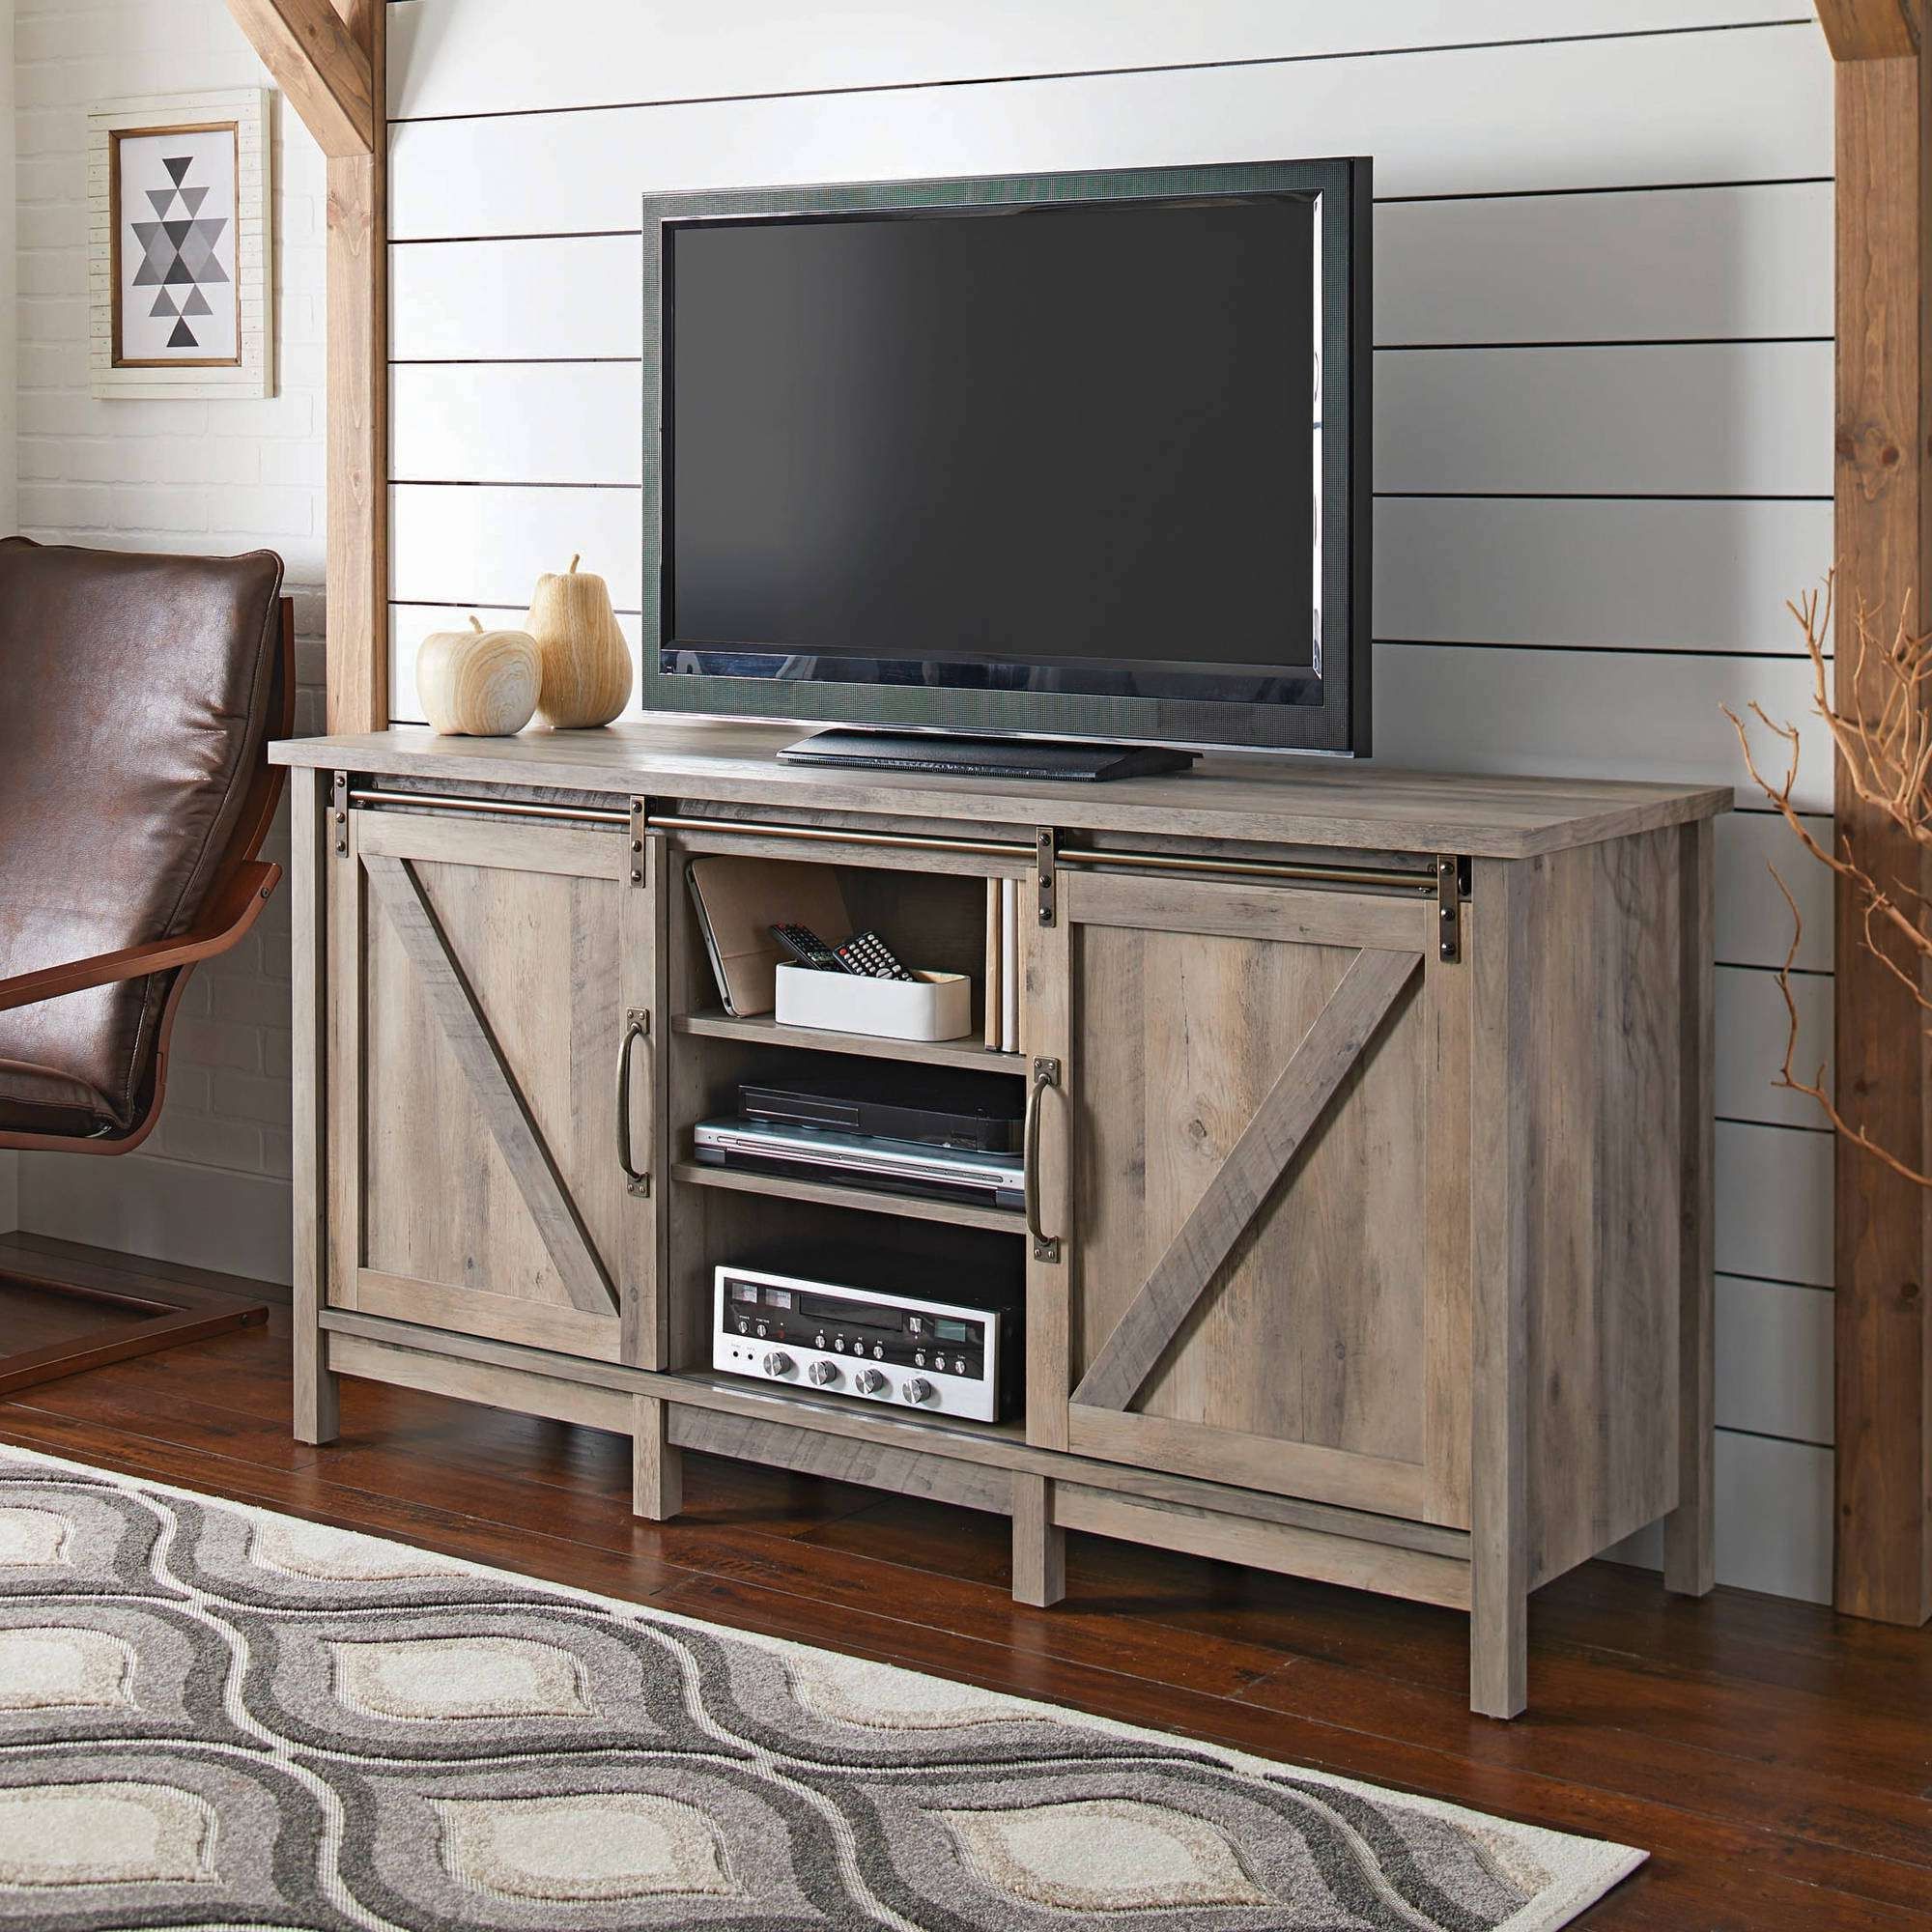 Rustic 60 Inch Tv Stands Decoration Inspiration 2000×2000 Attachment Within Most Up To Date Rustic 60 Inch Tv Stands (View 3 of 20)